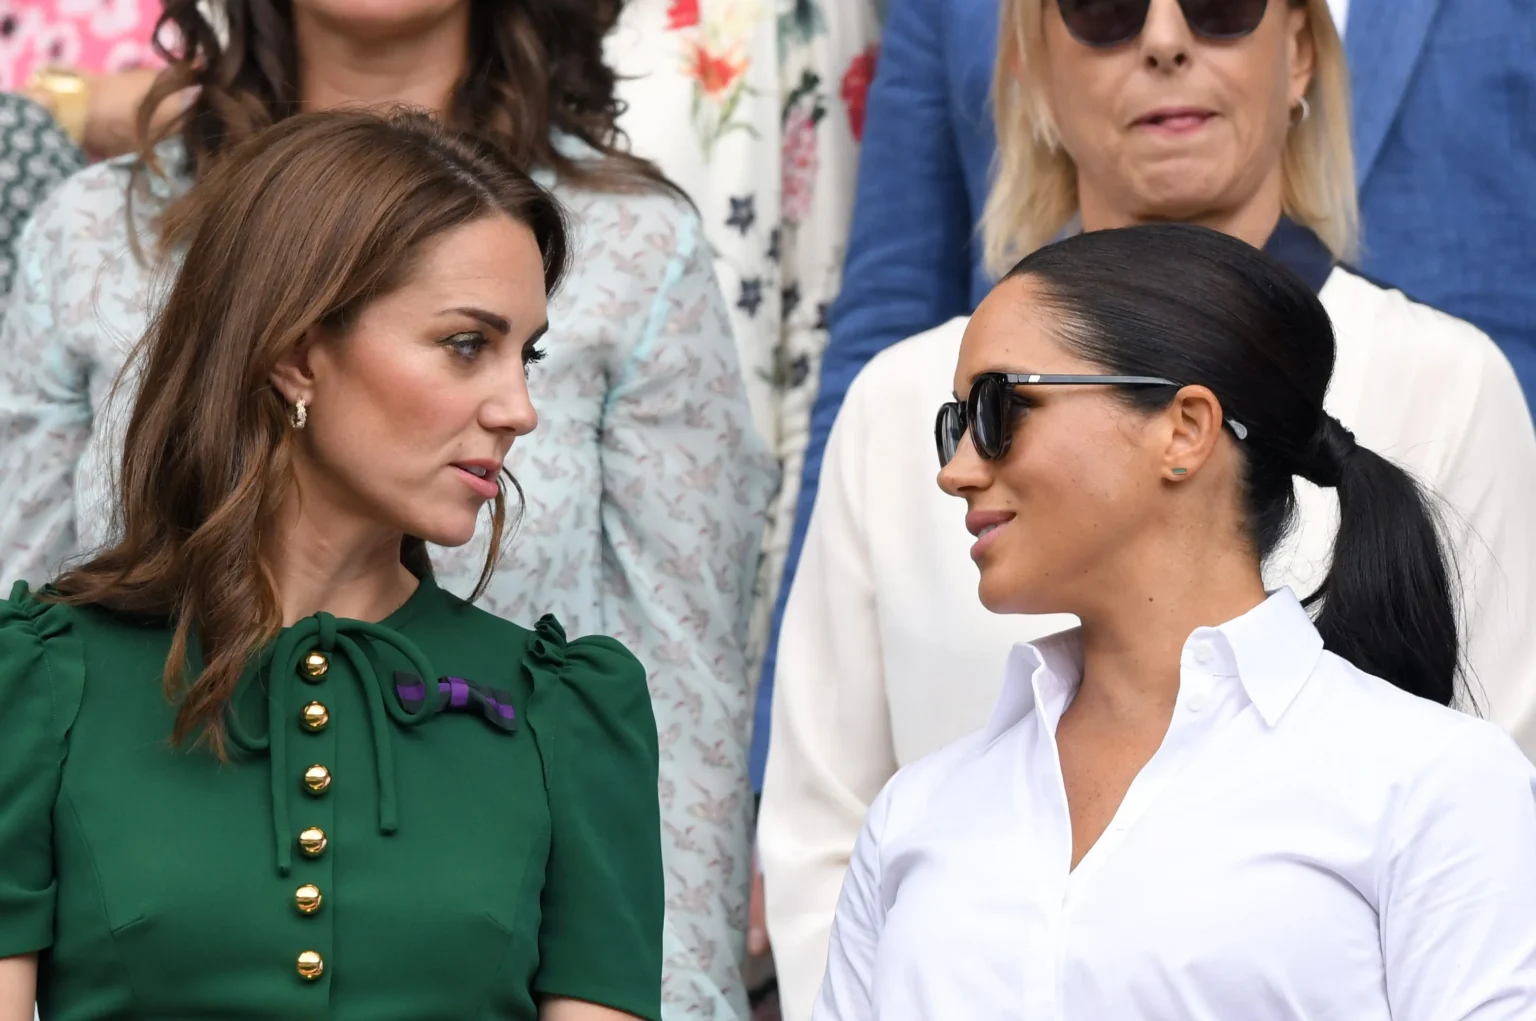 kate-middleton-is-in-deep-trouble-now-as-meghan-markle-reaches-out